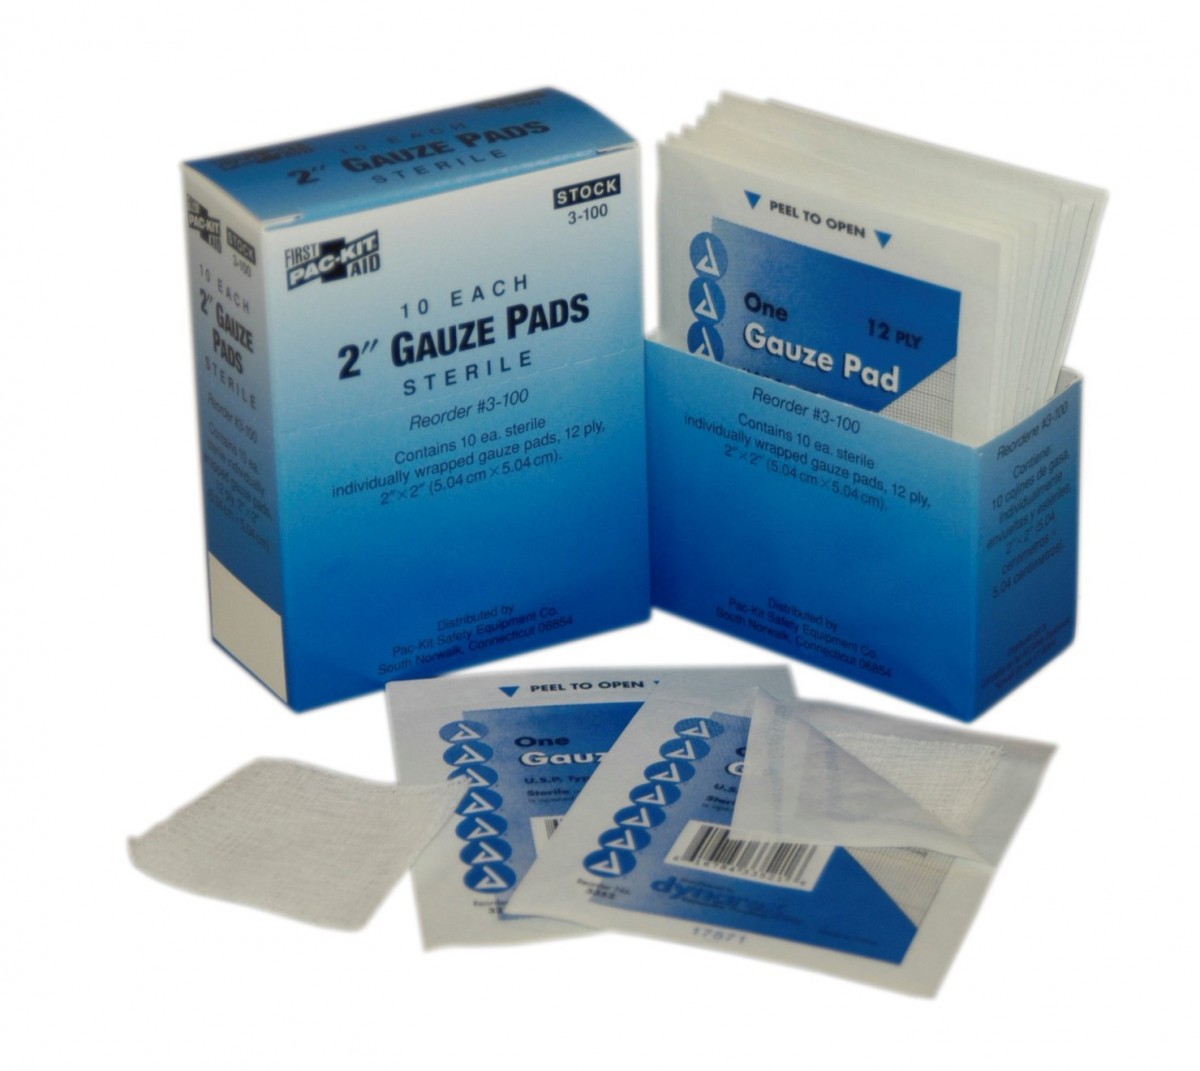 Individually Wrapped Sterile Gauze Pads, 2"x2"